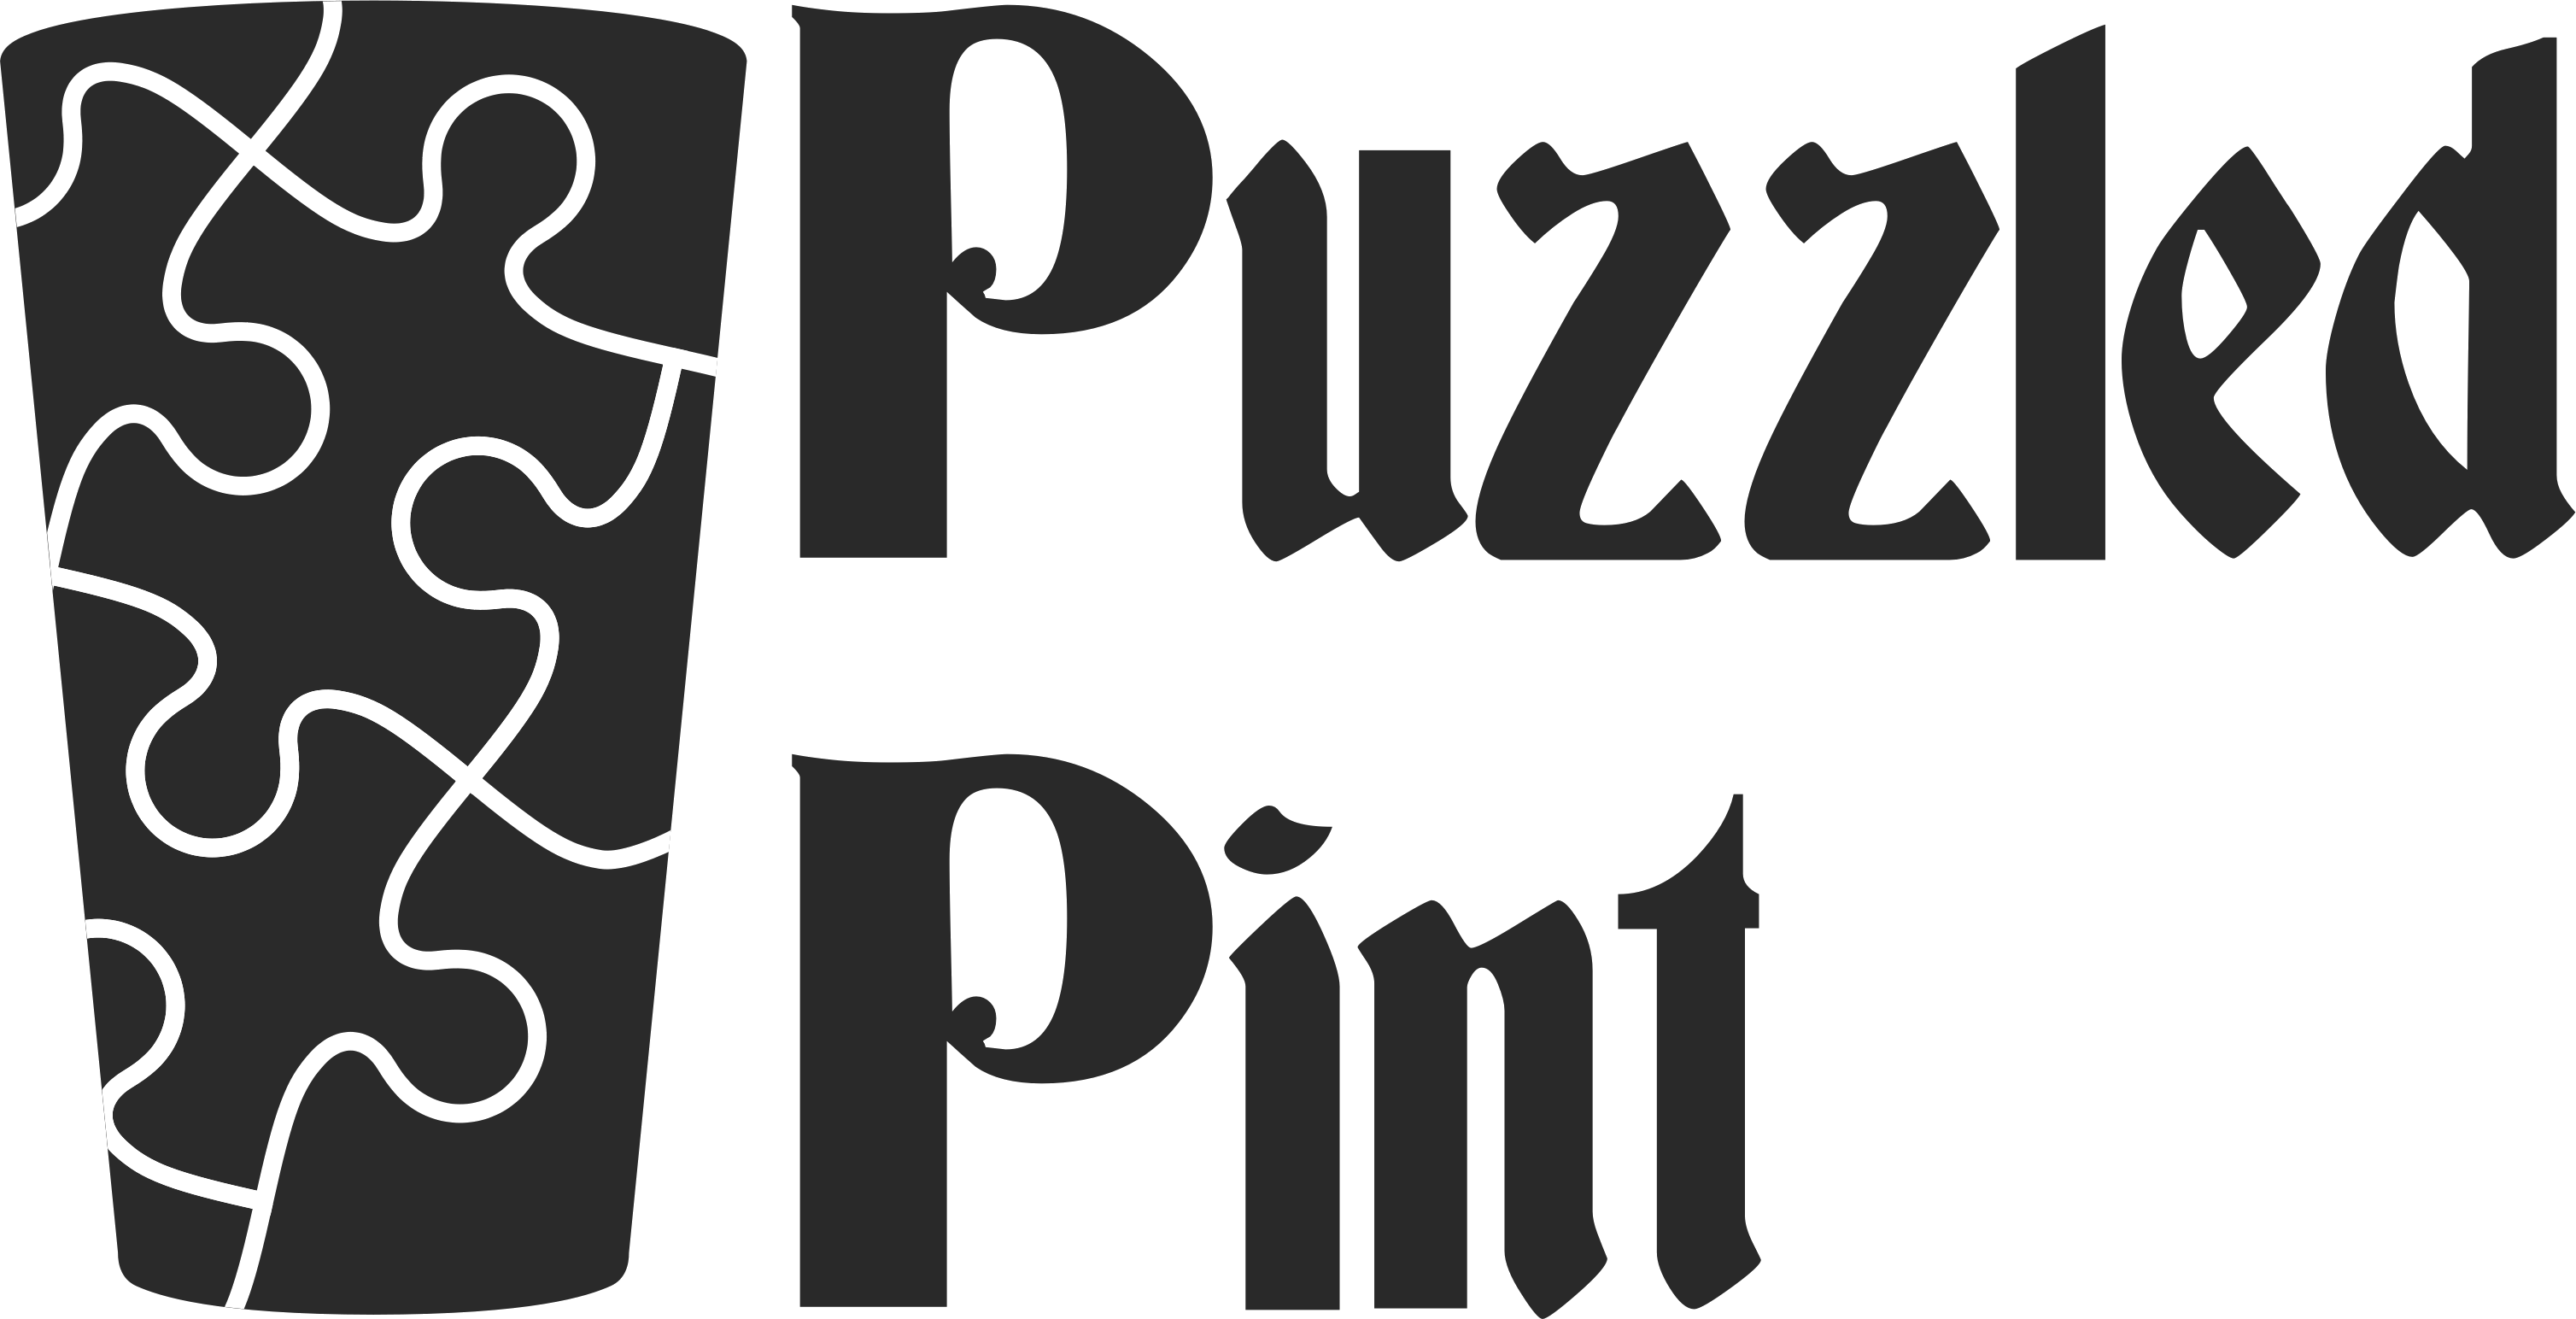 Puzzled Pint